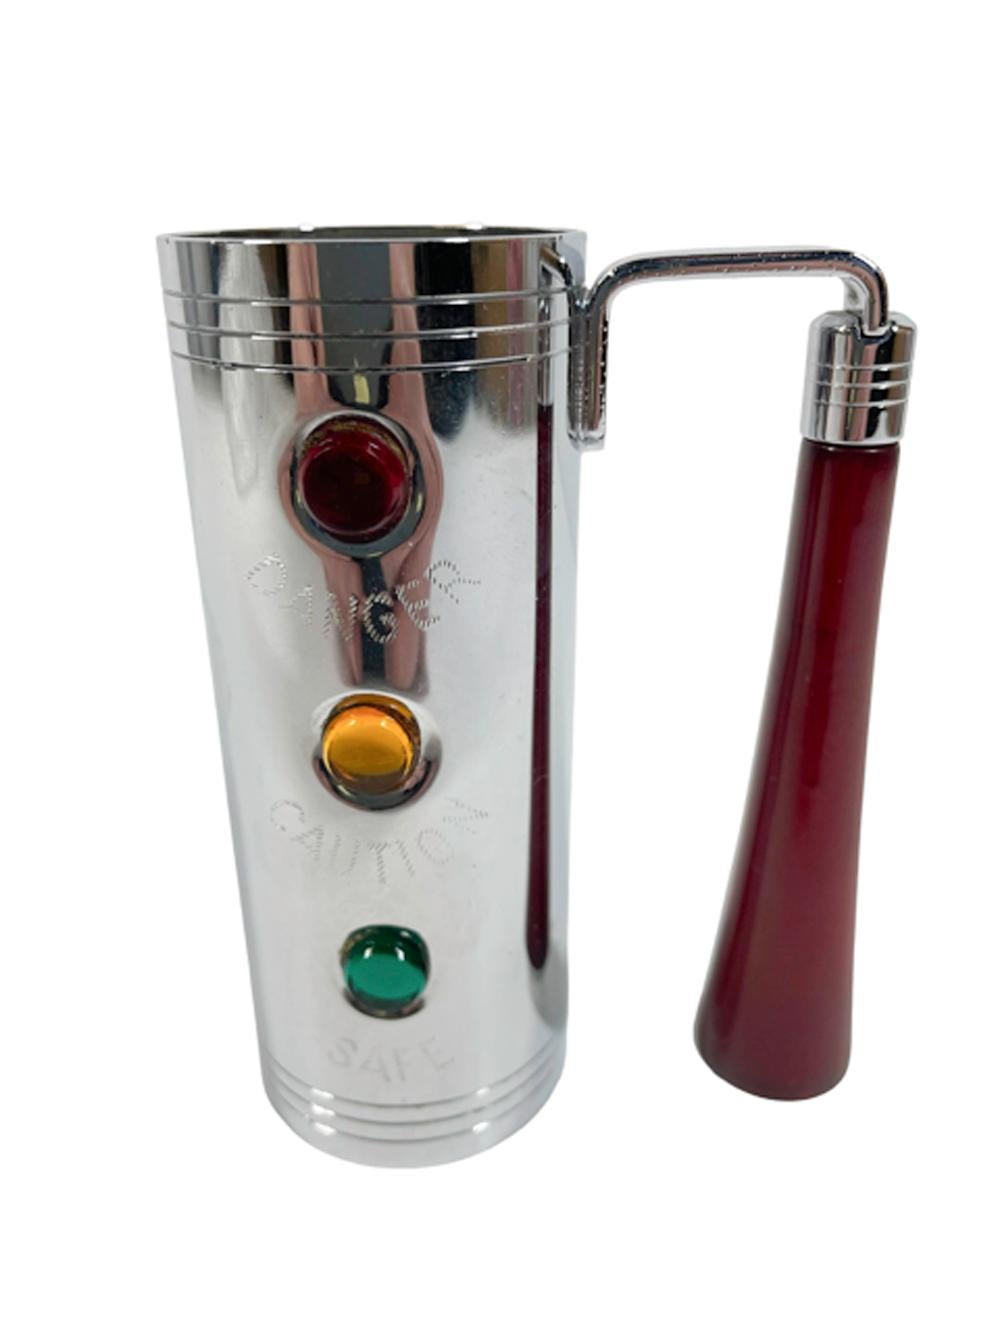 Chrome cylindrical spirit measure / jigger with red Bakelite handle made by Glo-Hill. The cylindrical 'stop light' measure with green, yellow and red 